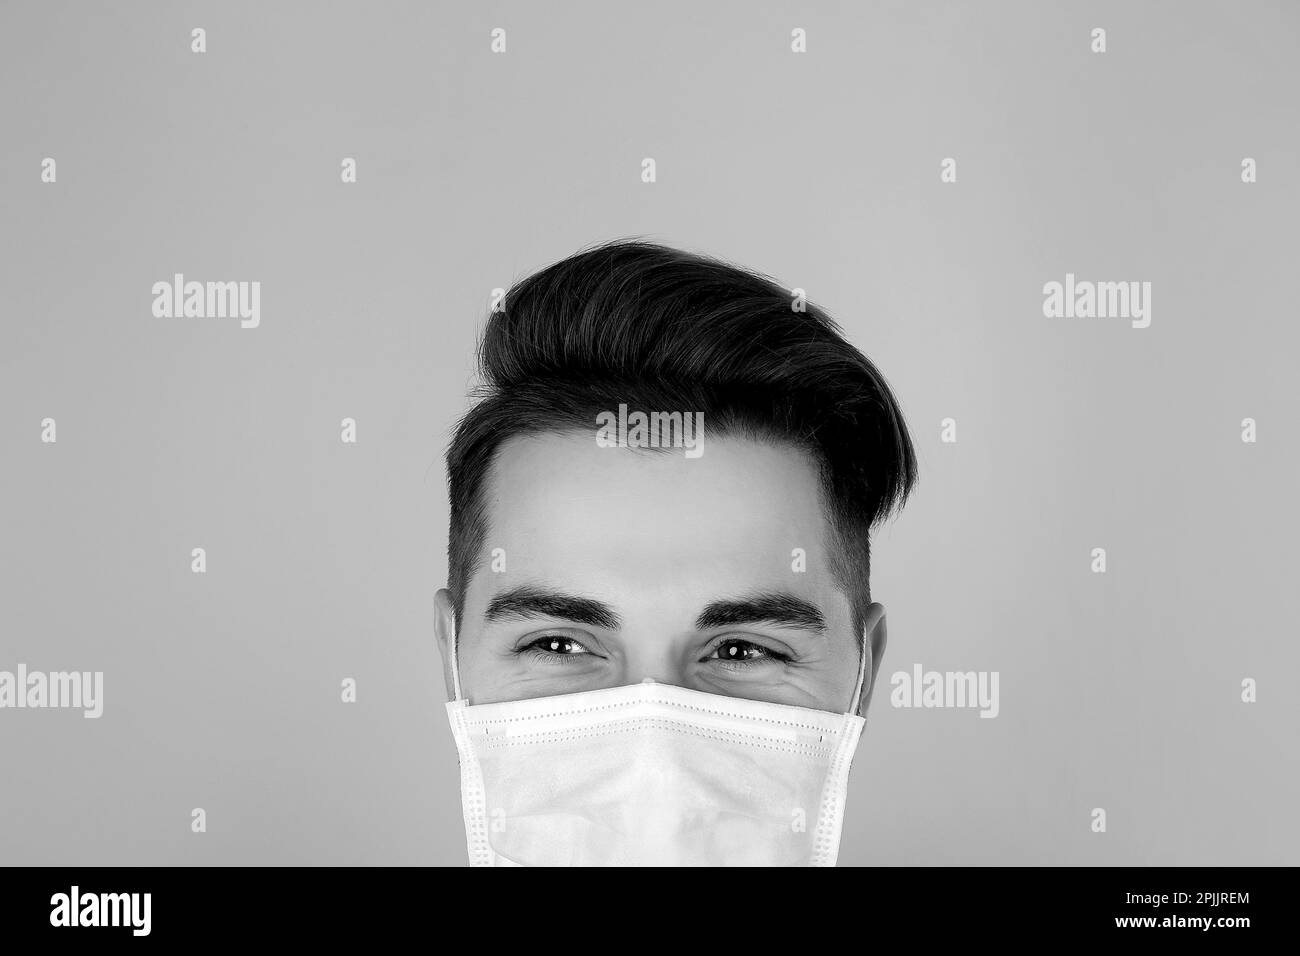 Man wearing medical face mask on light background. Black and white photography Stock Photo